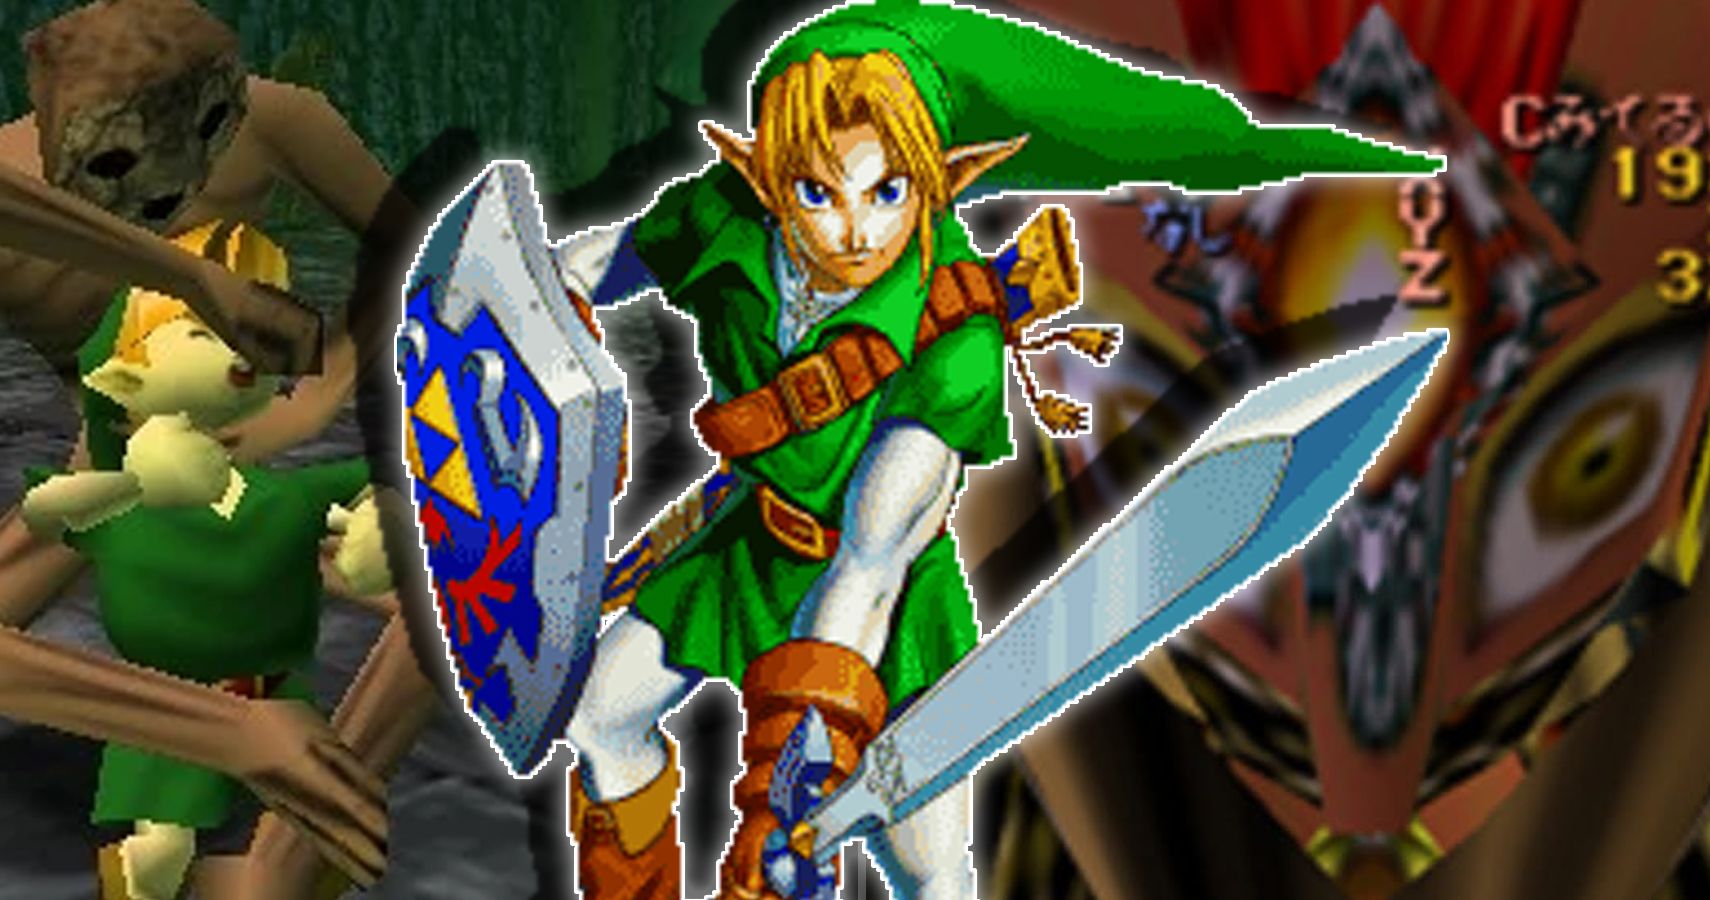 Legend of Zelda: Ocarina Of Time Fan-Made PC Port Is Out - GameSpot